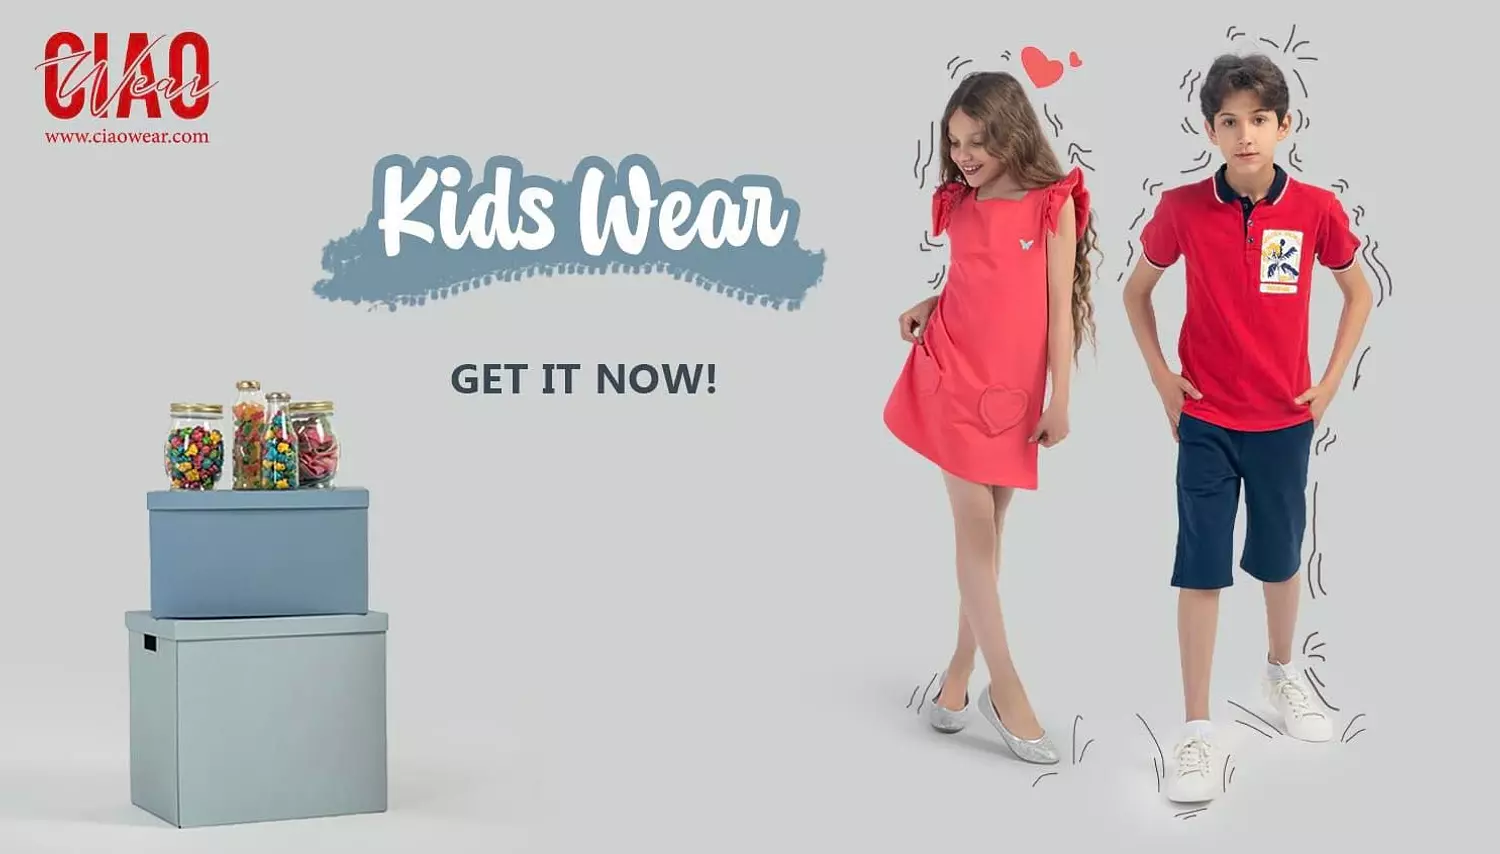 banner image for Ciao wear